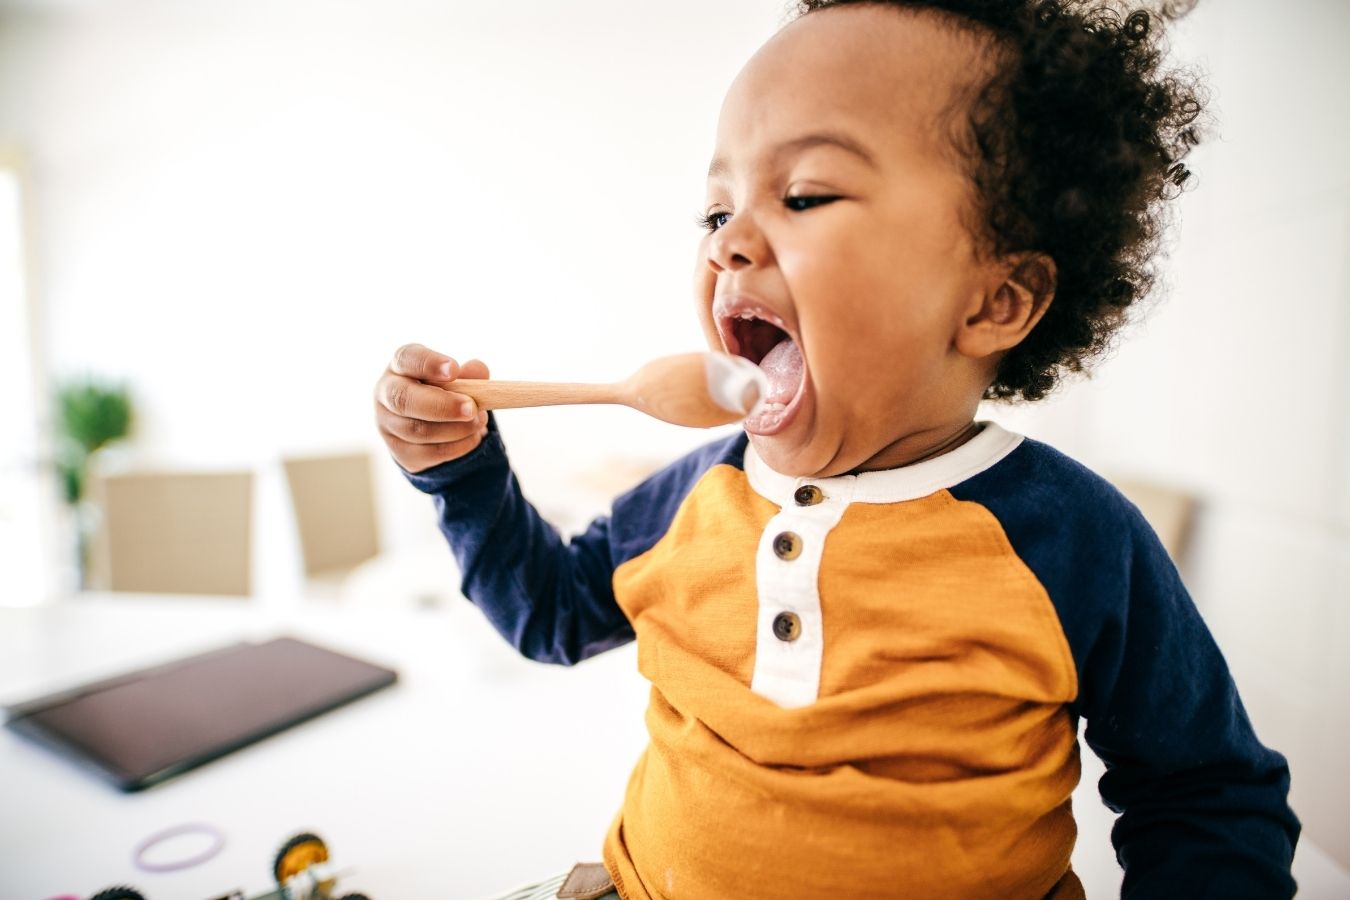 self feeding tips for toddlers